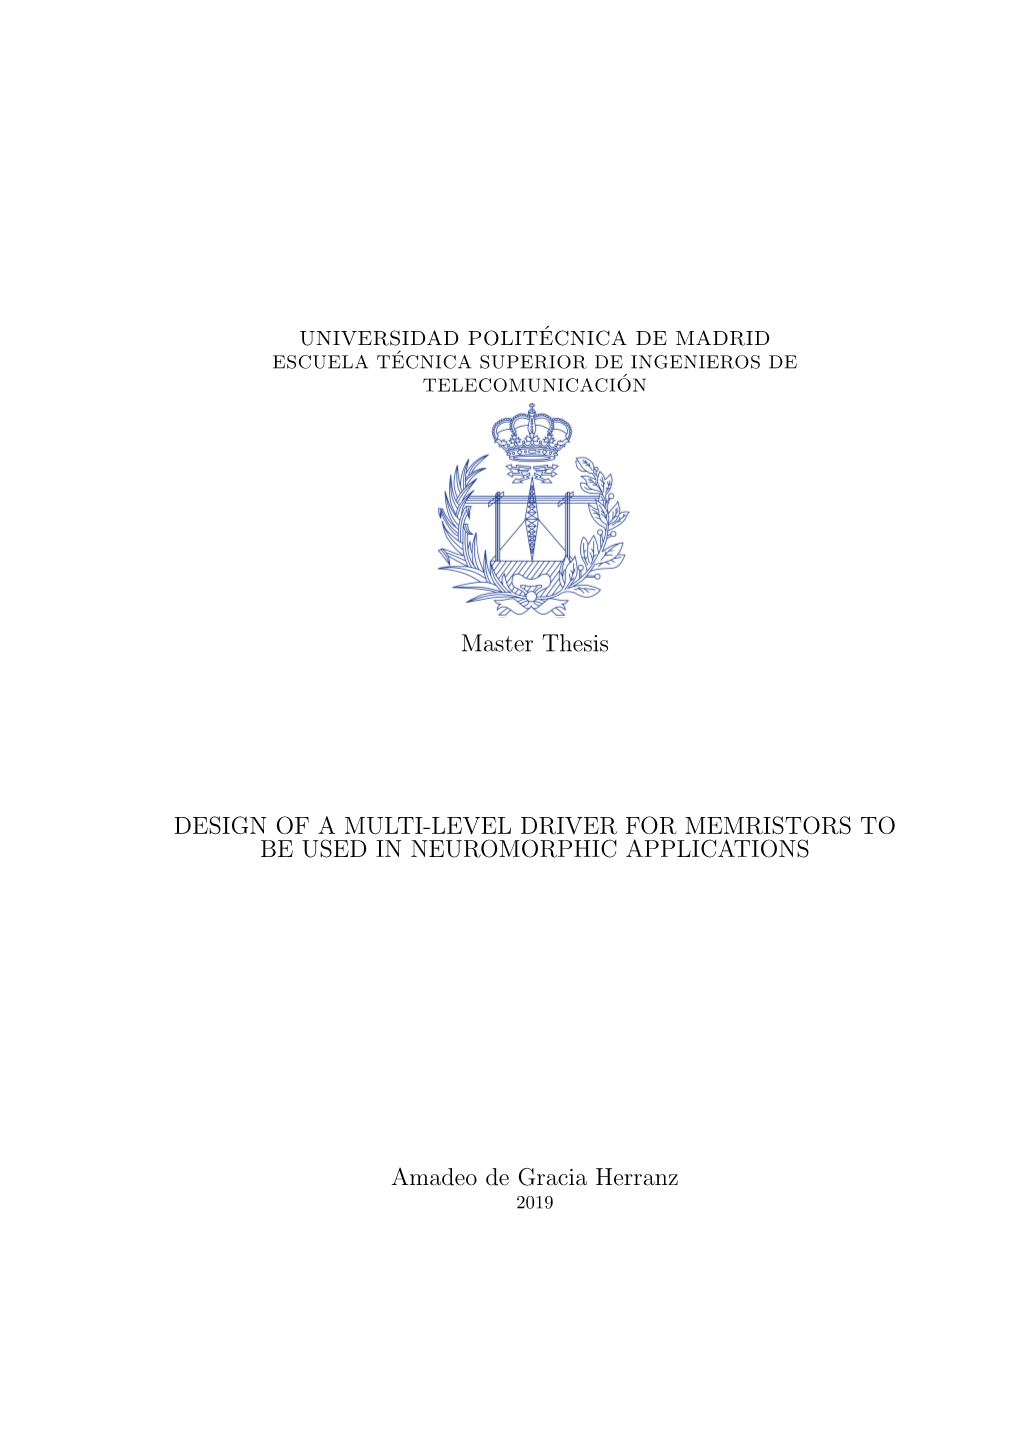 Master Thesis DESIGN of a MULTI-LEVEL DRIVER for MEMRISTORS to BE USED in NEUROMORPHIC APPLICATIONS Amadeo De Gracia Herranz